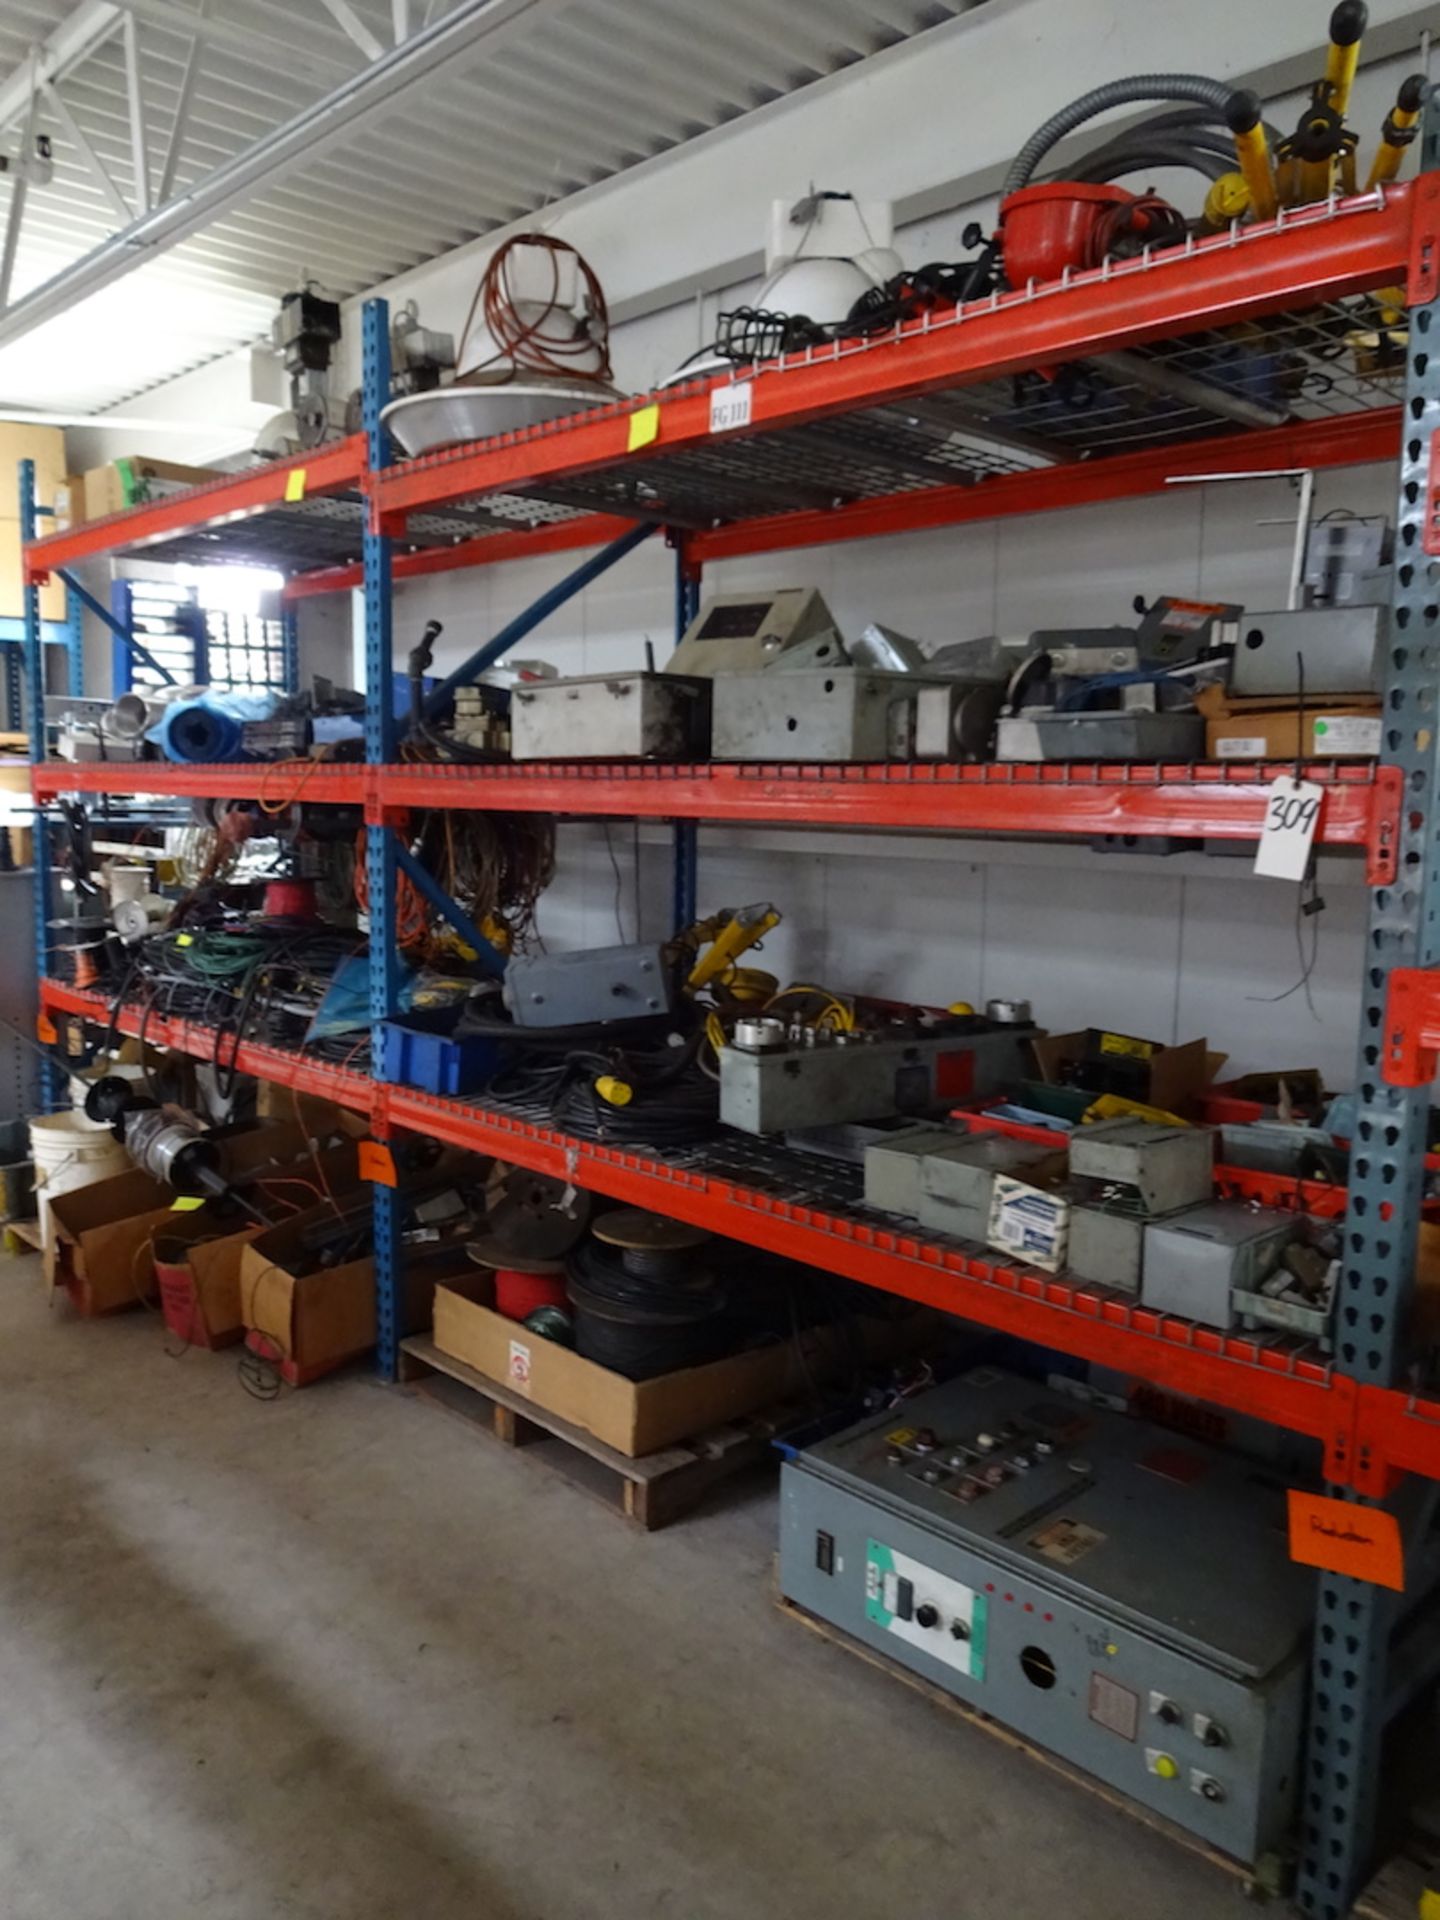 LOT: Assorted Electrical Components including Wire, Fuse Boxes, Lights, etc. (on pallet rack)